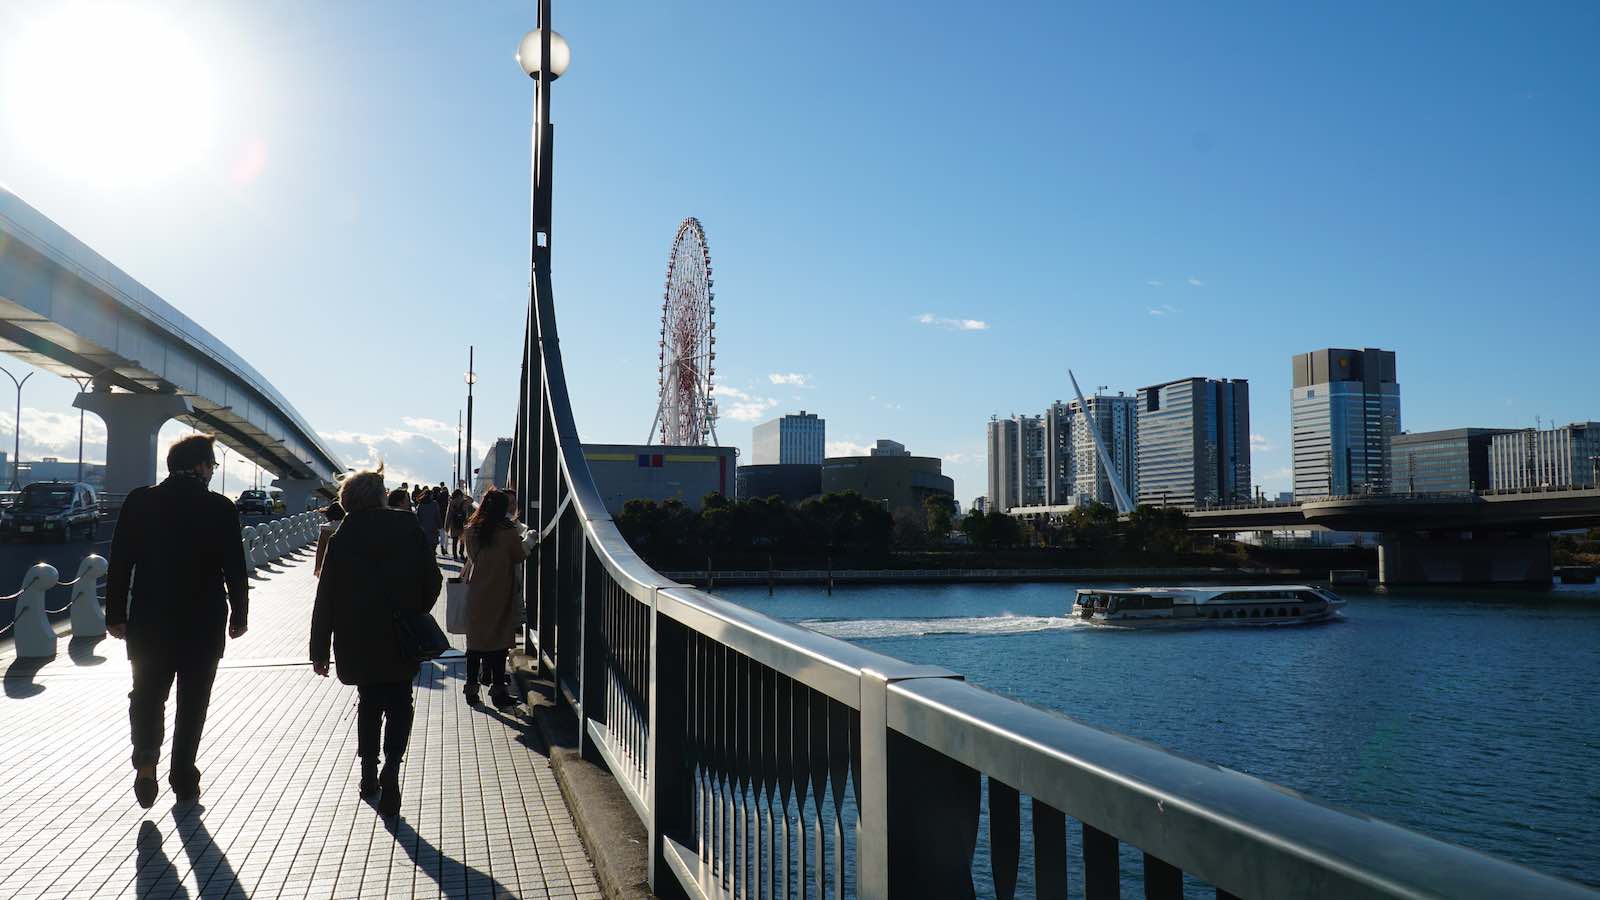 I left Comiket shortly after and walked a couple blocks down the street towards a park called Daiba Park. Every street in the city felt so clean, nice, well designed and taken care of. I have also never see a waterway in the middle of a dense urban area so blue and clean.